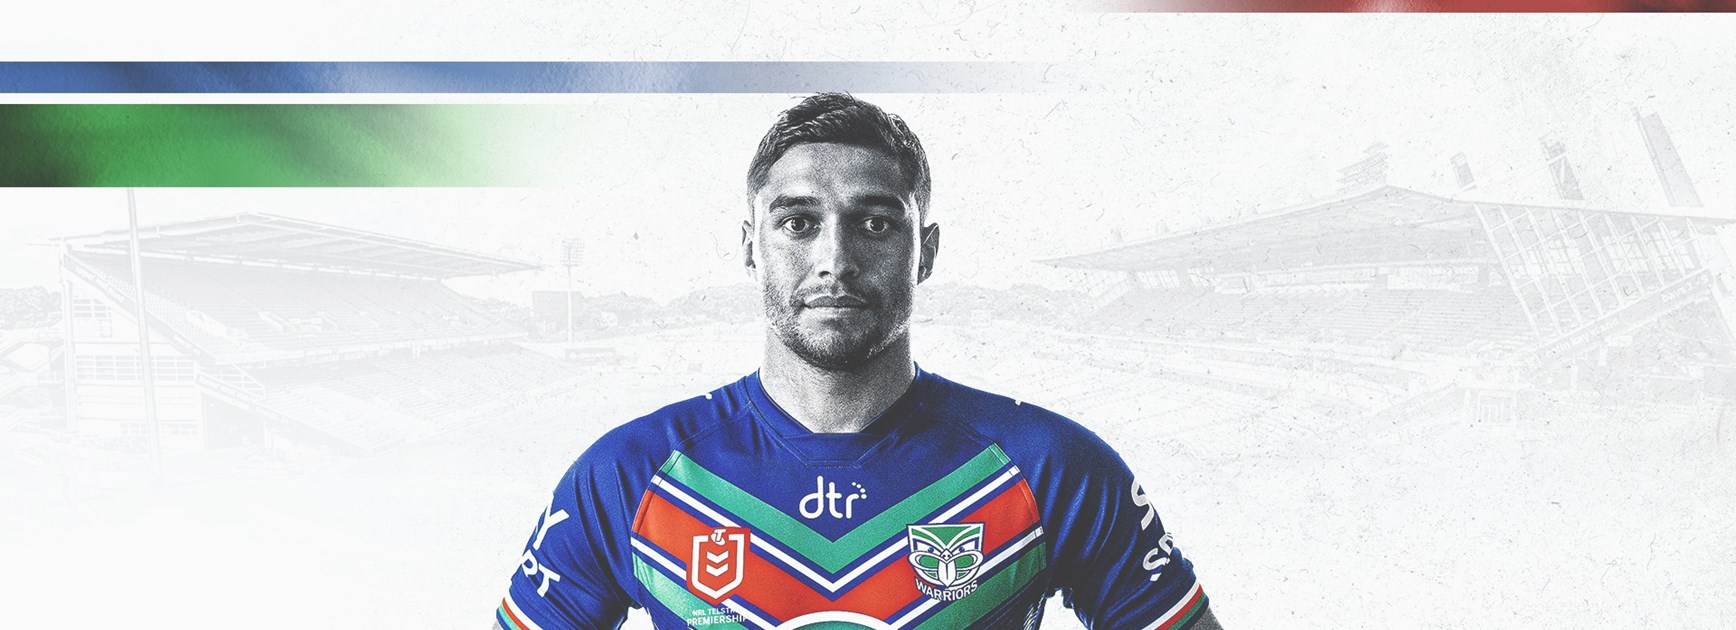 Home and away jerseys for 2023 season released